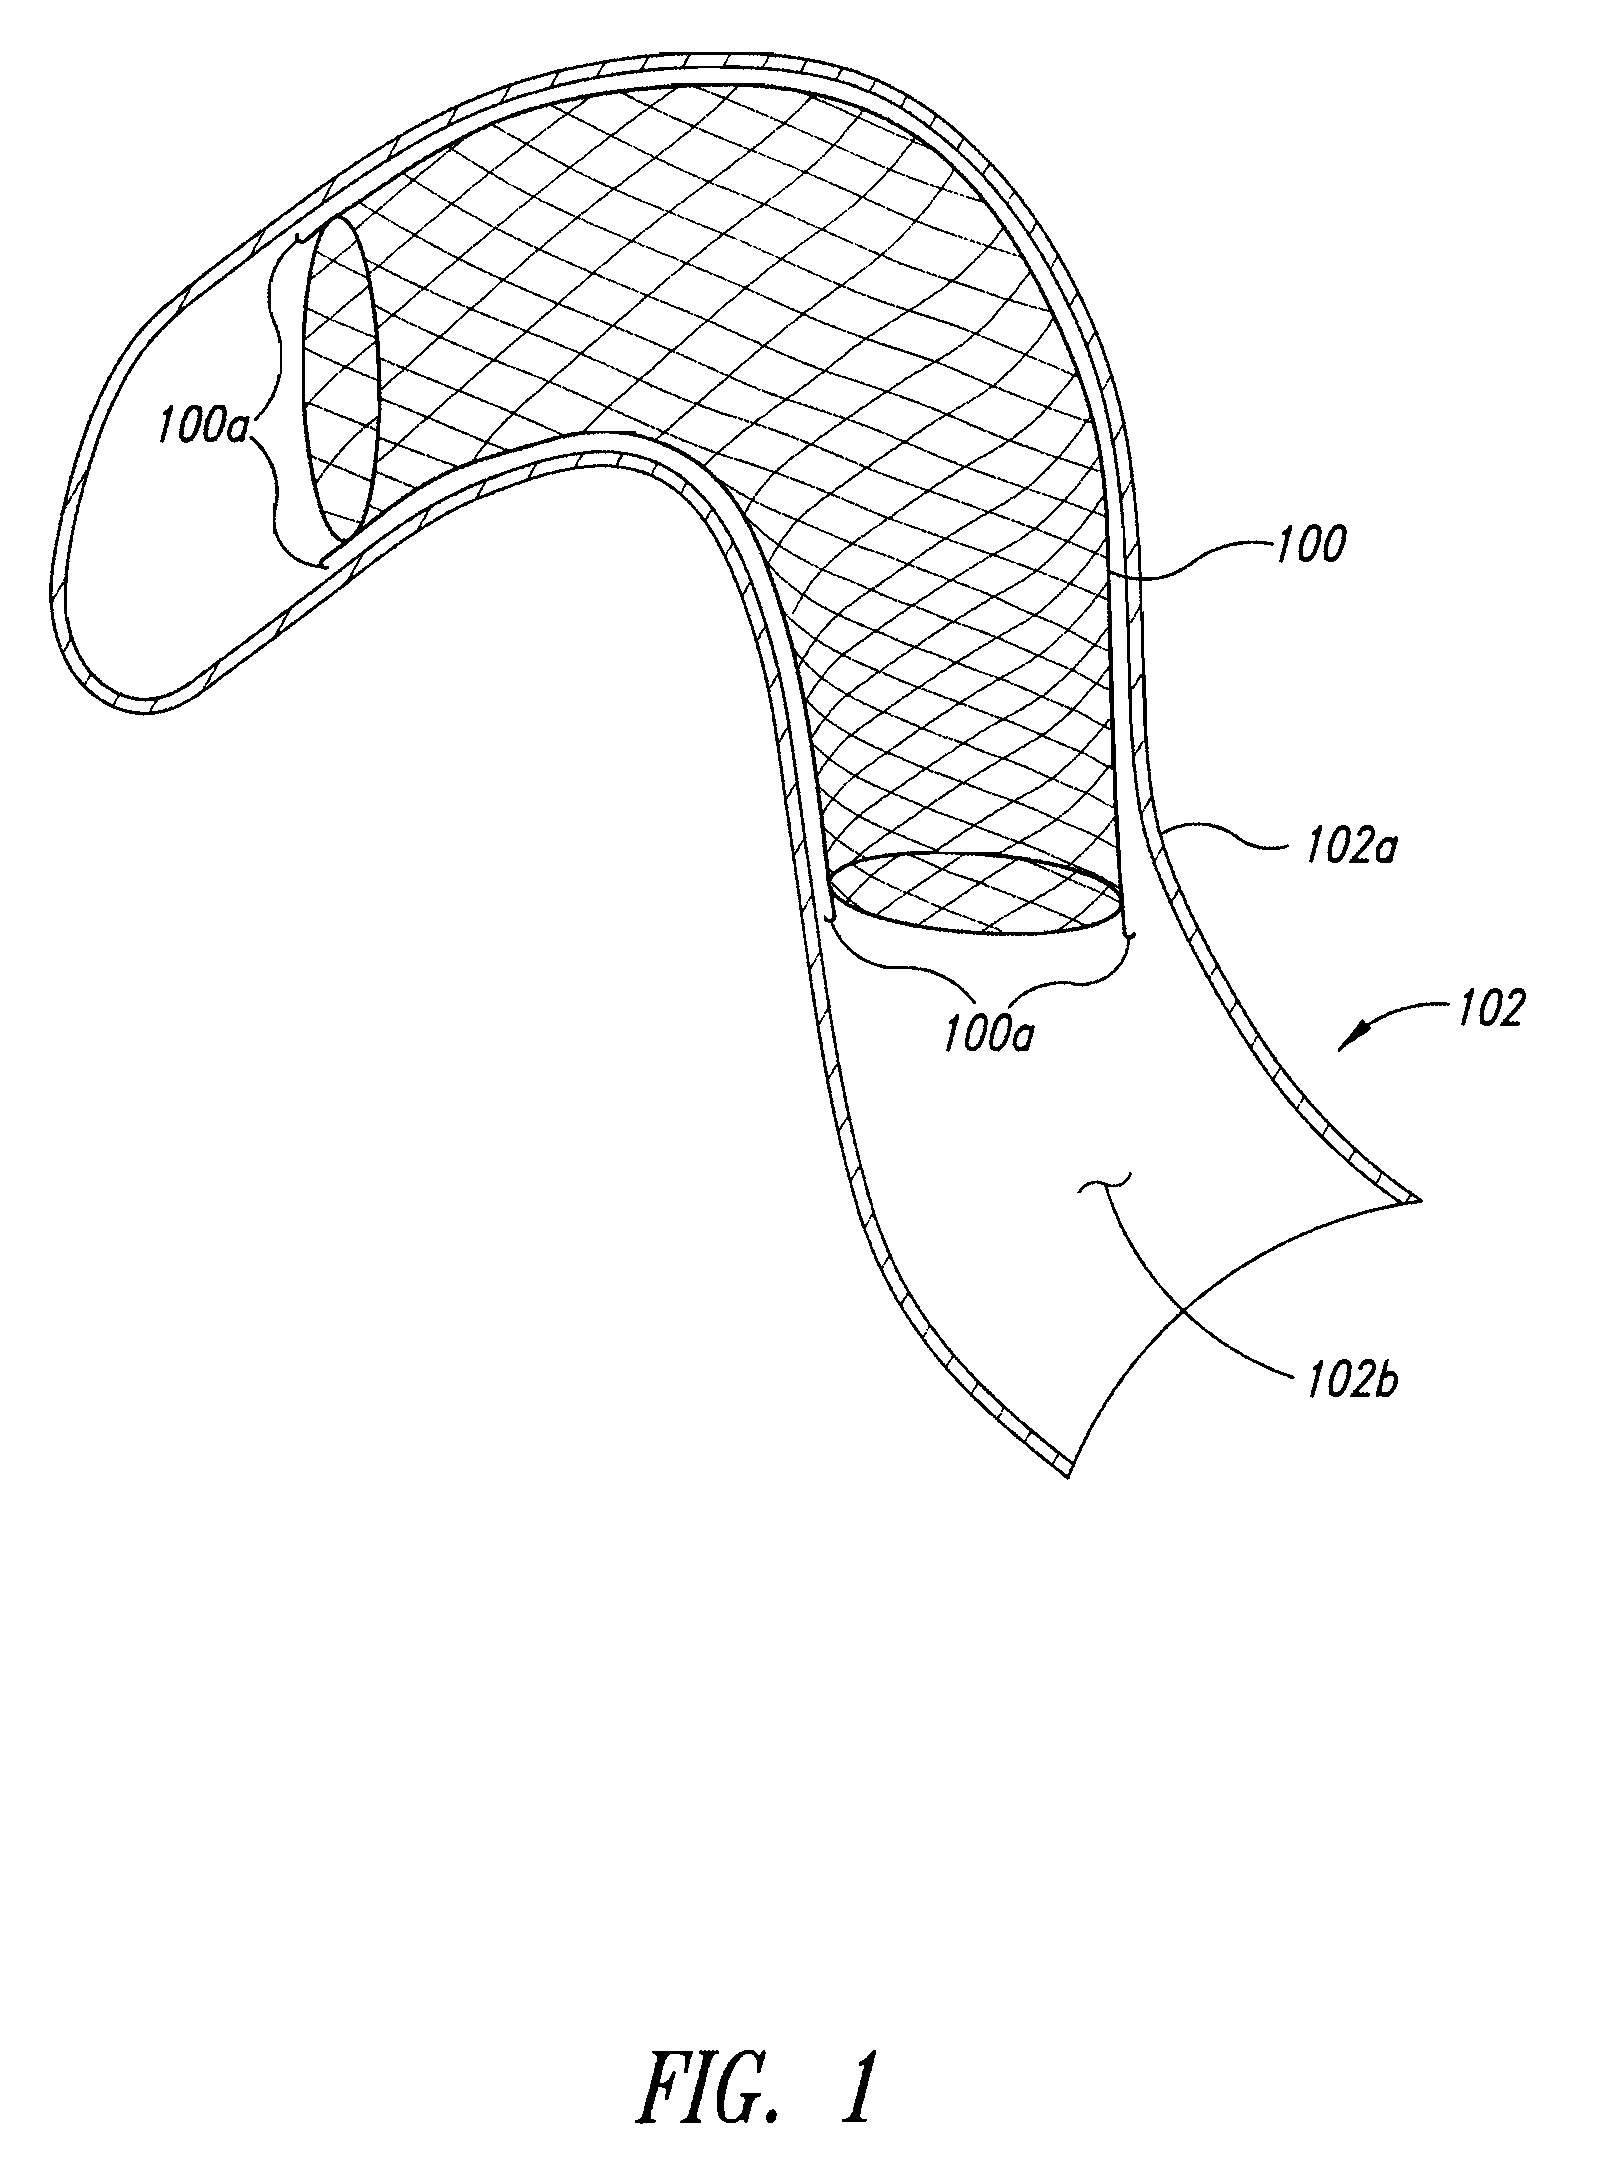 In vivo inflatable structures, for example to expand stents